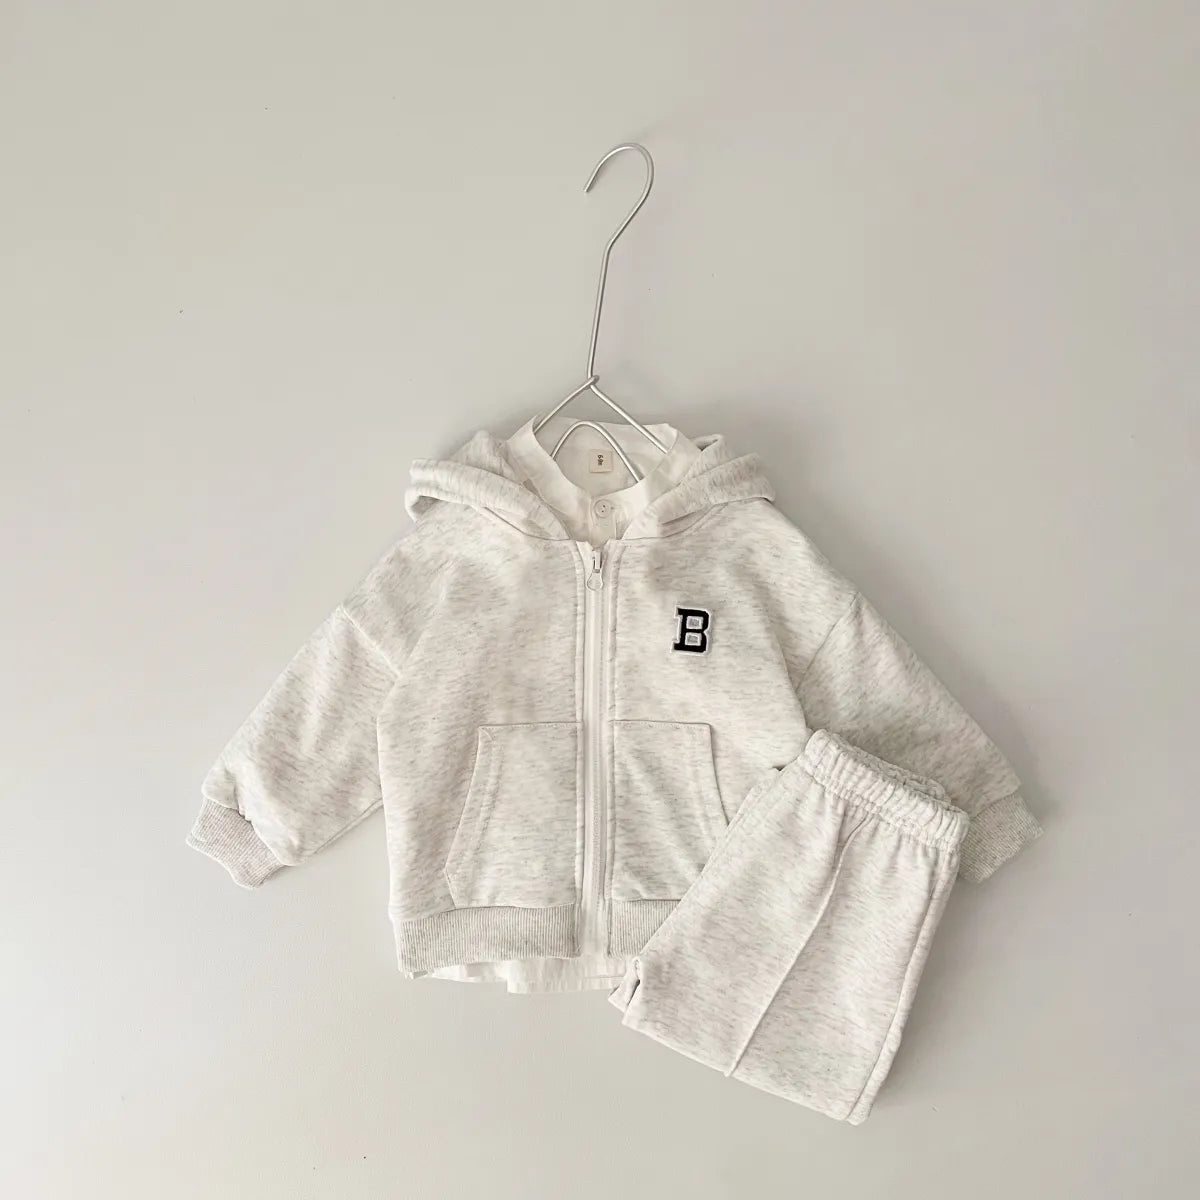 Infant/Toddler Letter Embroidery Sports Jacket and Pants Set